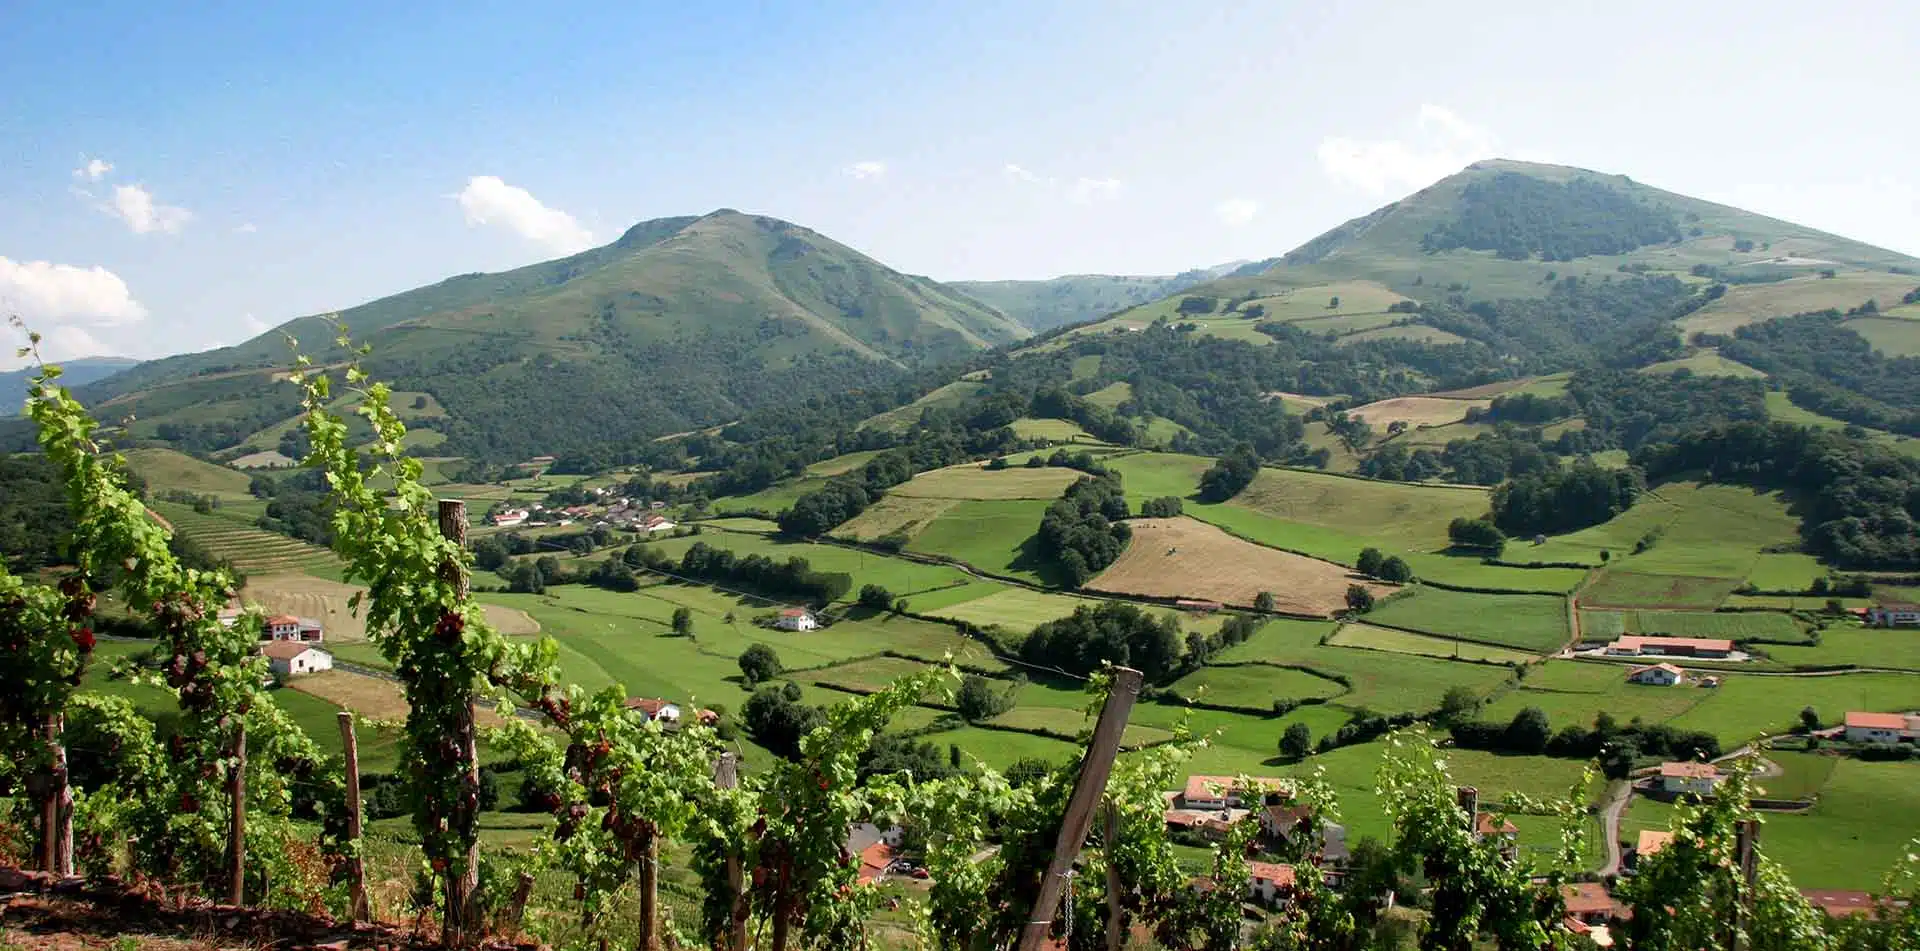 Countryside of Arce, Basque Pyrenees, Spain & France